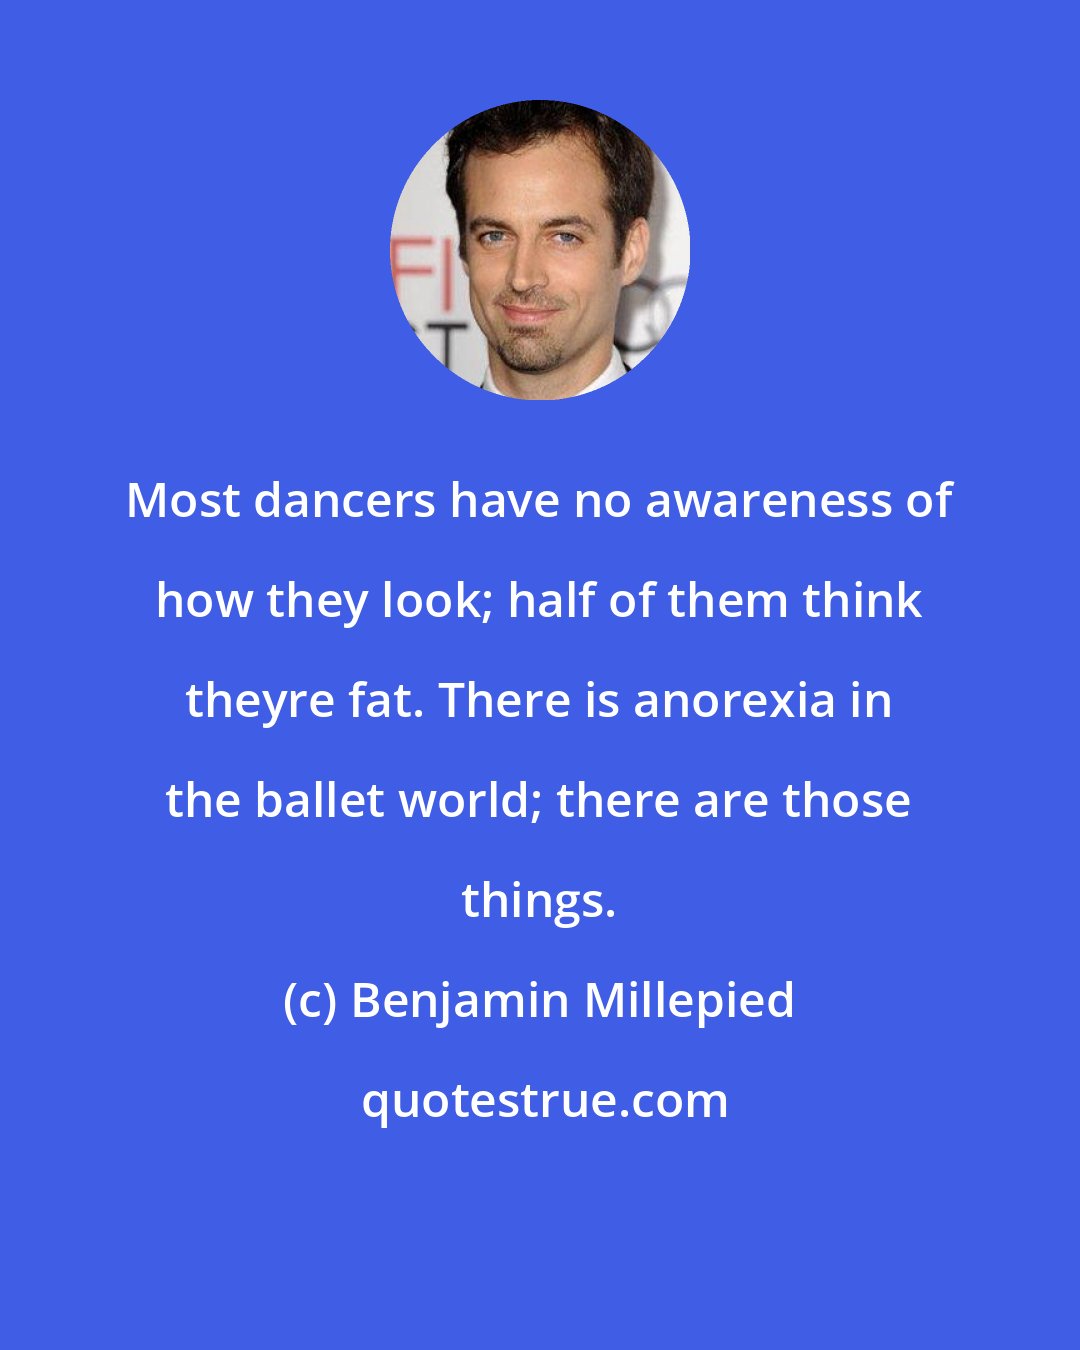 Benjamin Millepied: Most dancers have no awareness of how they look; half of them think theyre fat. There is anorexia in the ballet world; there are those things.